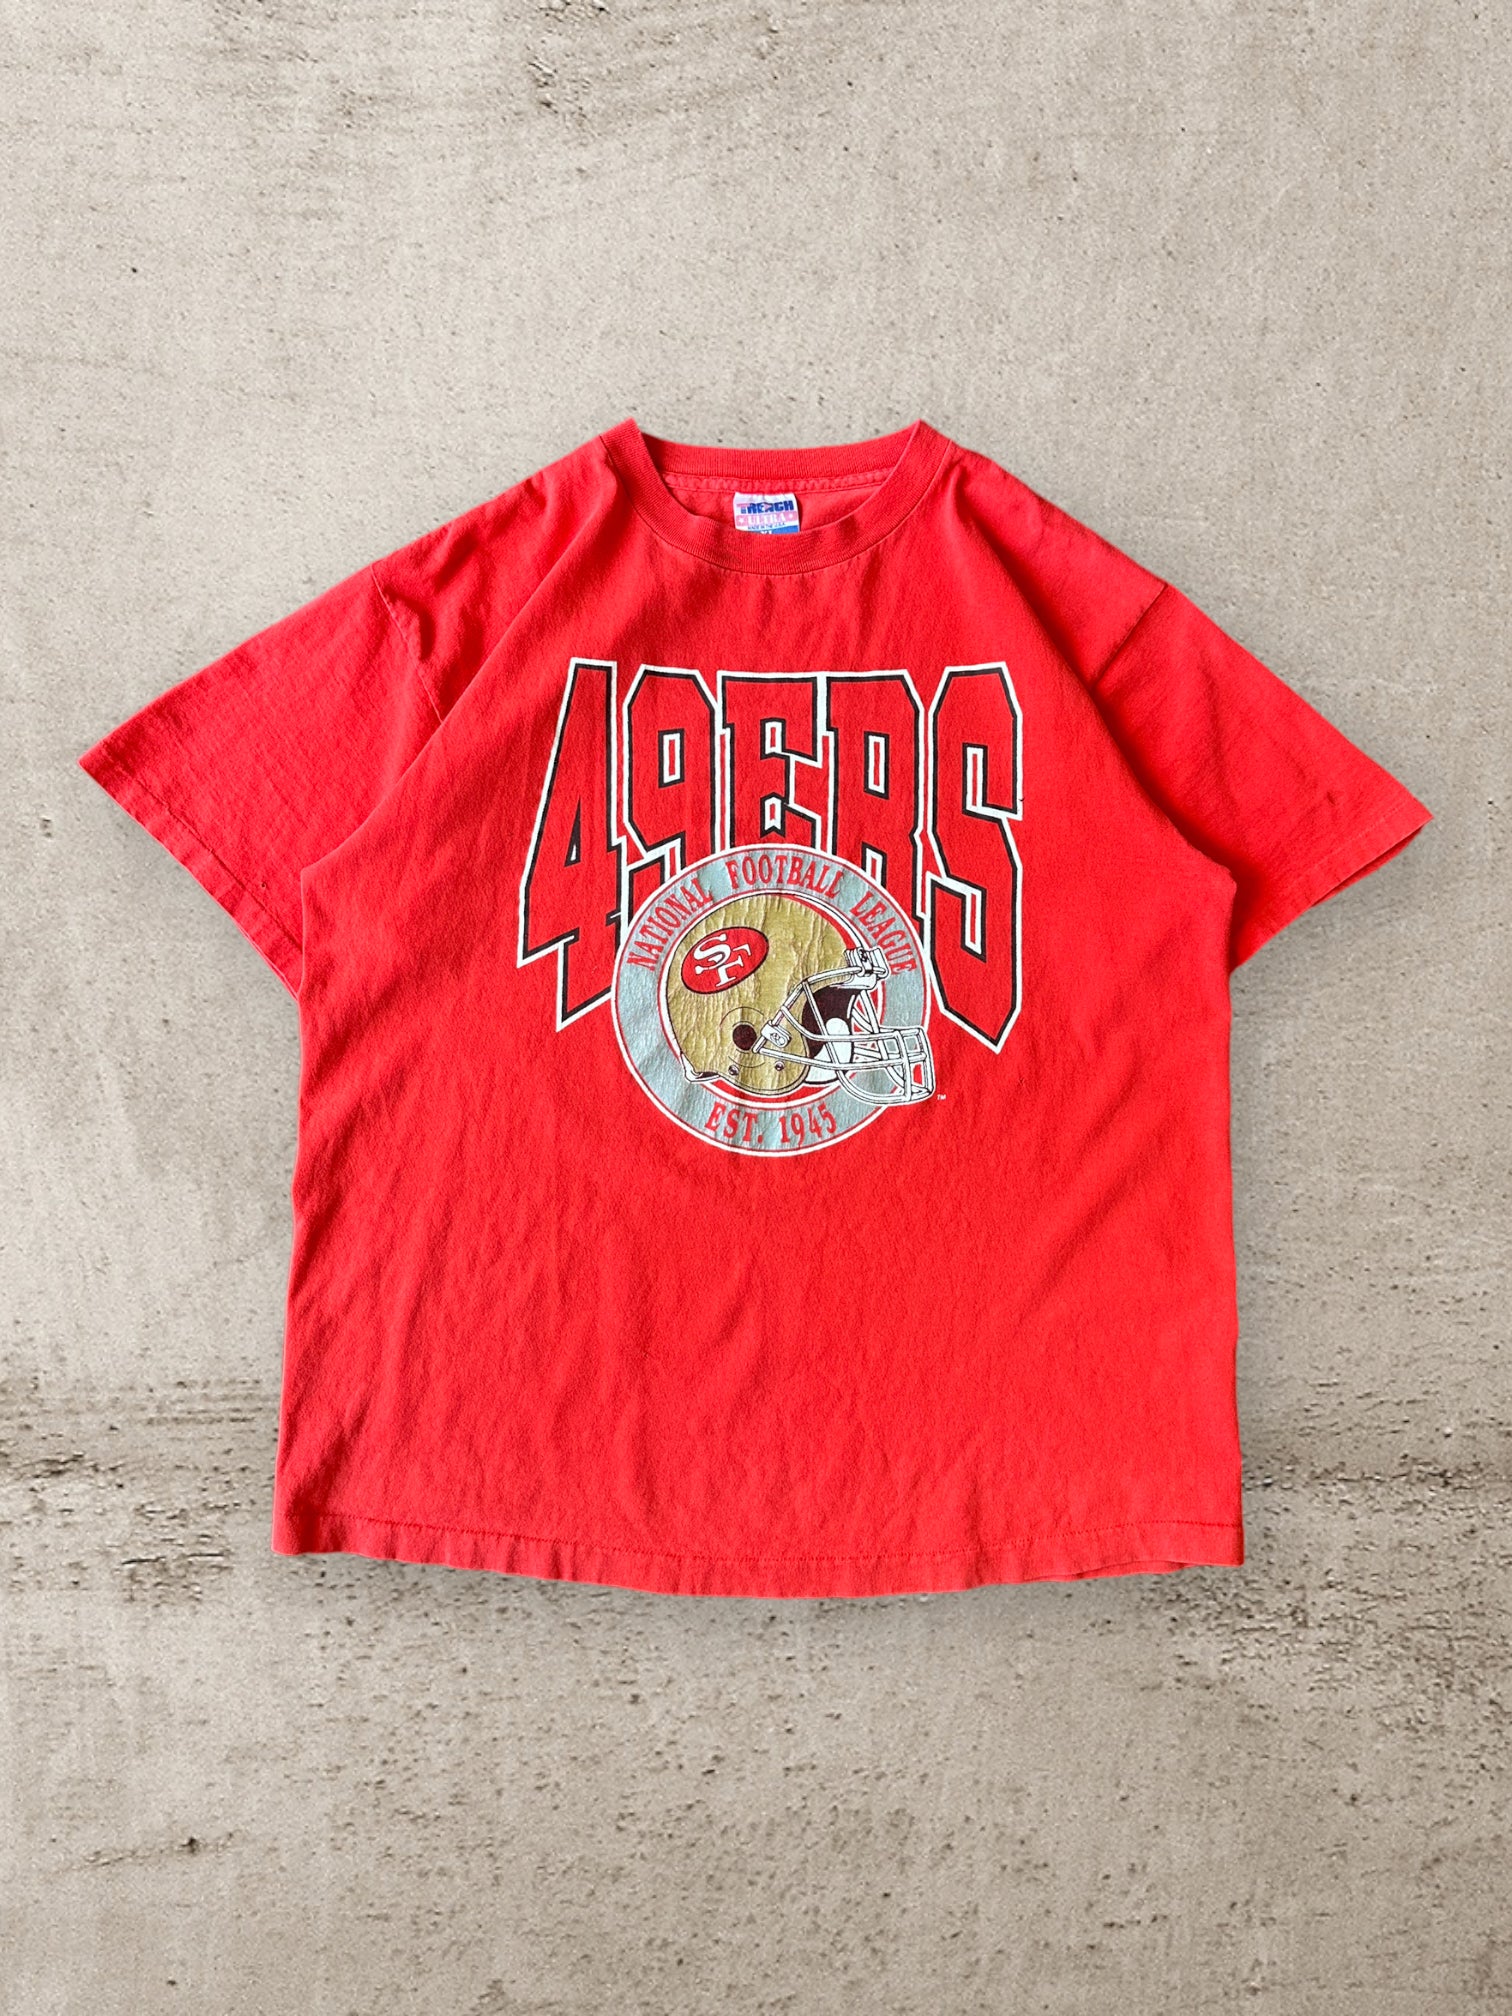 90s San Francisco 49ers Graphic T-Shirt - Large